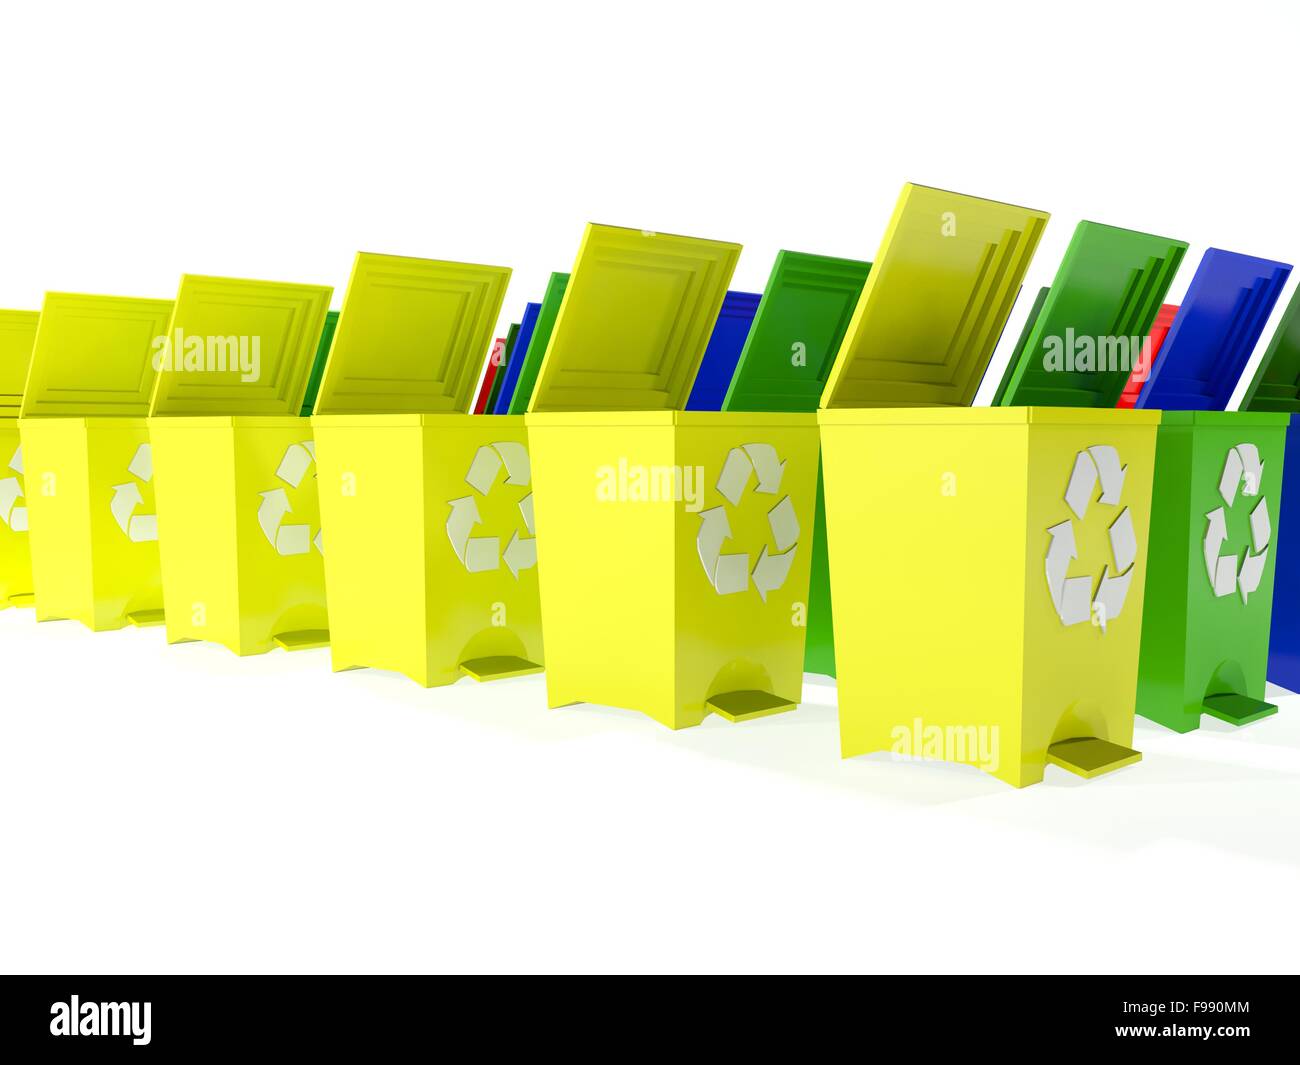 https://c8.alamy.com/comp/F990MM/recycle-bins-in-yellowgreenblue-and-red-F990MM.jpg